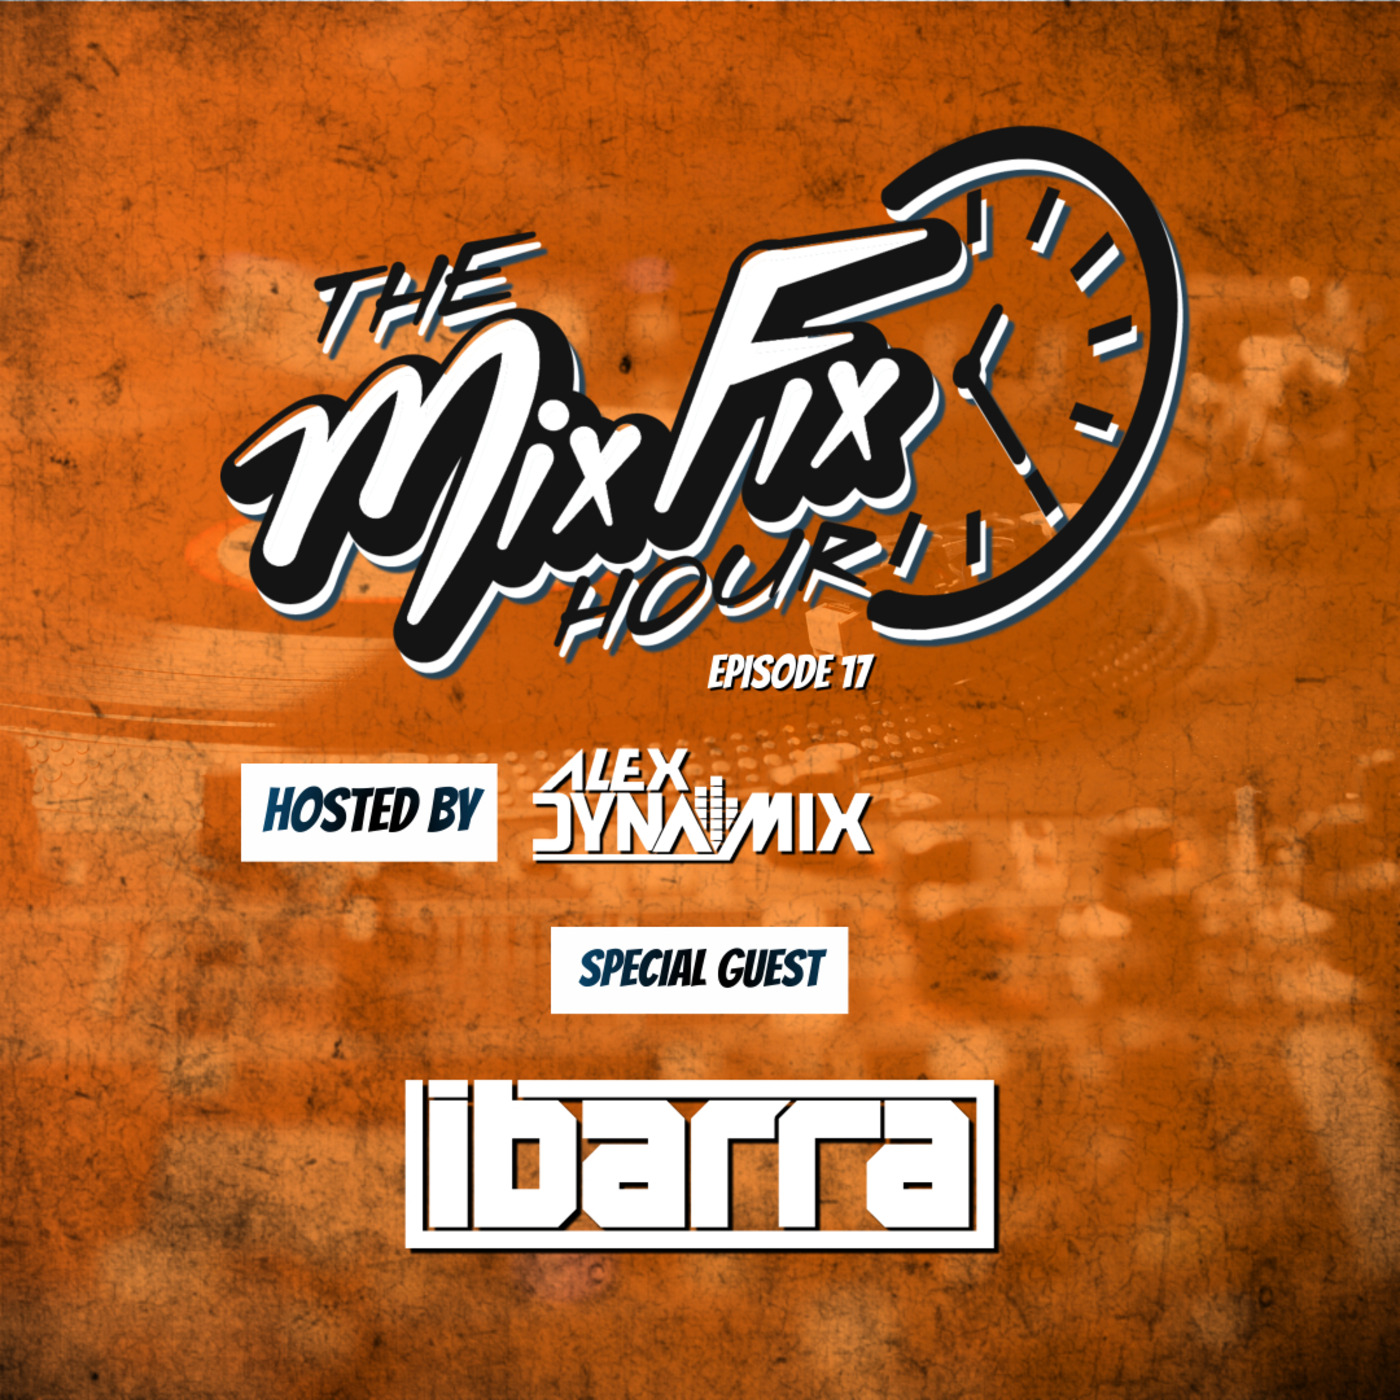 Episode 17: The Mix Fix Hour Hosted By Alex Dynamix - Episode 17 Feat. DJ Ibarra